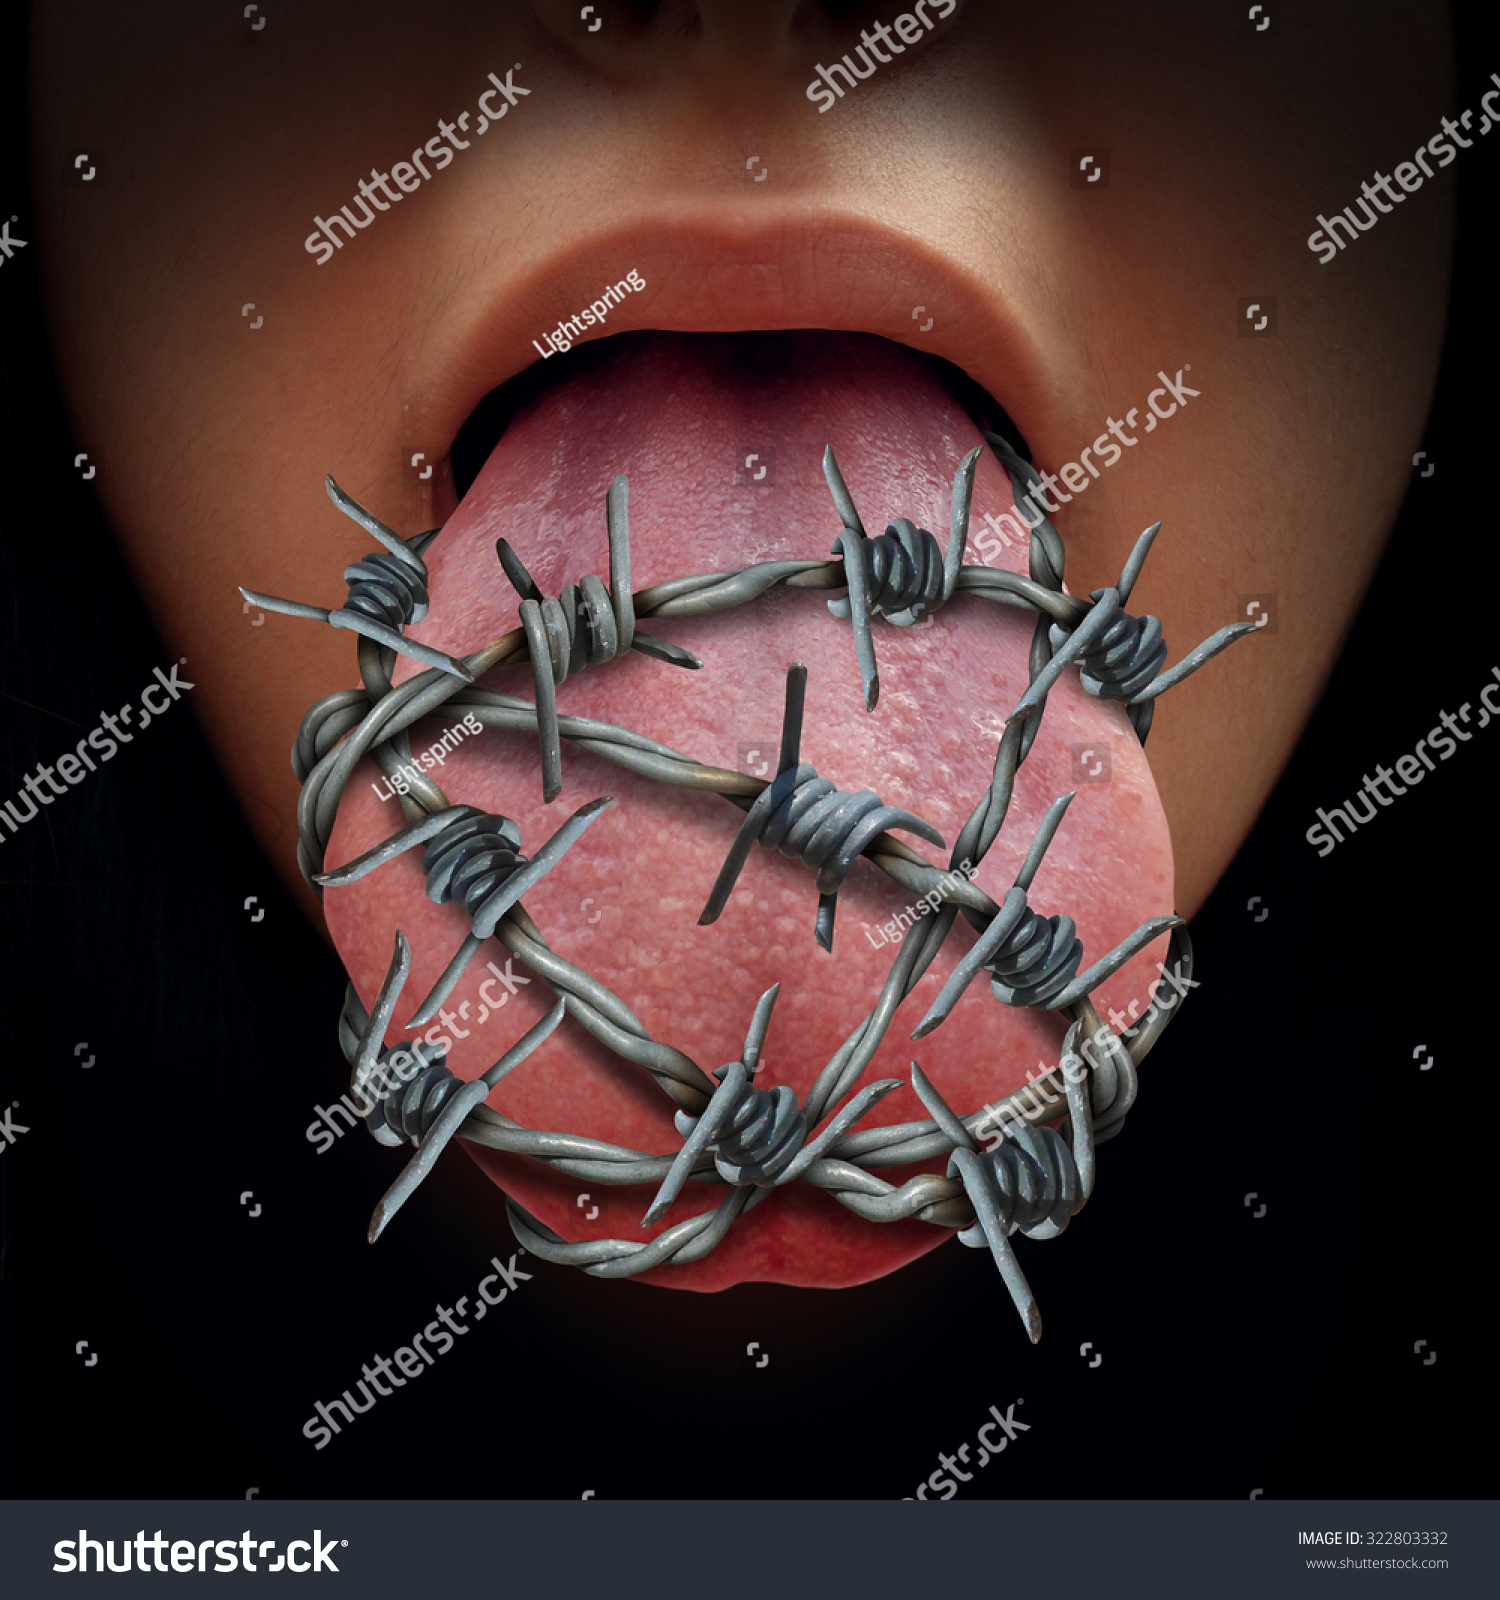 stock-photo-freedom-of-speech-crisis-concept-and-censorship-in-expression-of-ideas-symbol-as-a-human-tongue-322803332.jpg